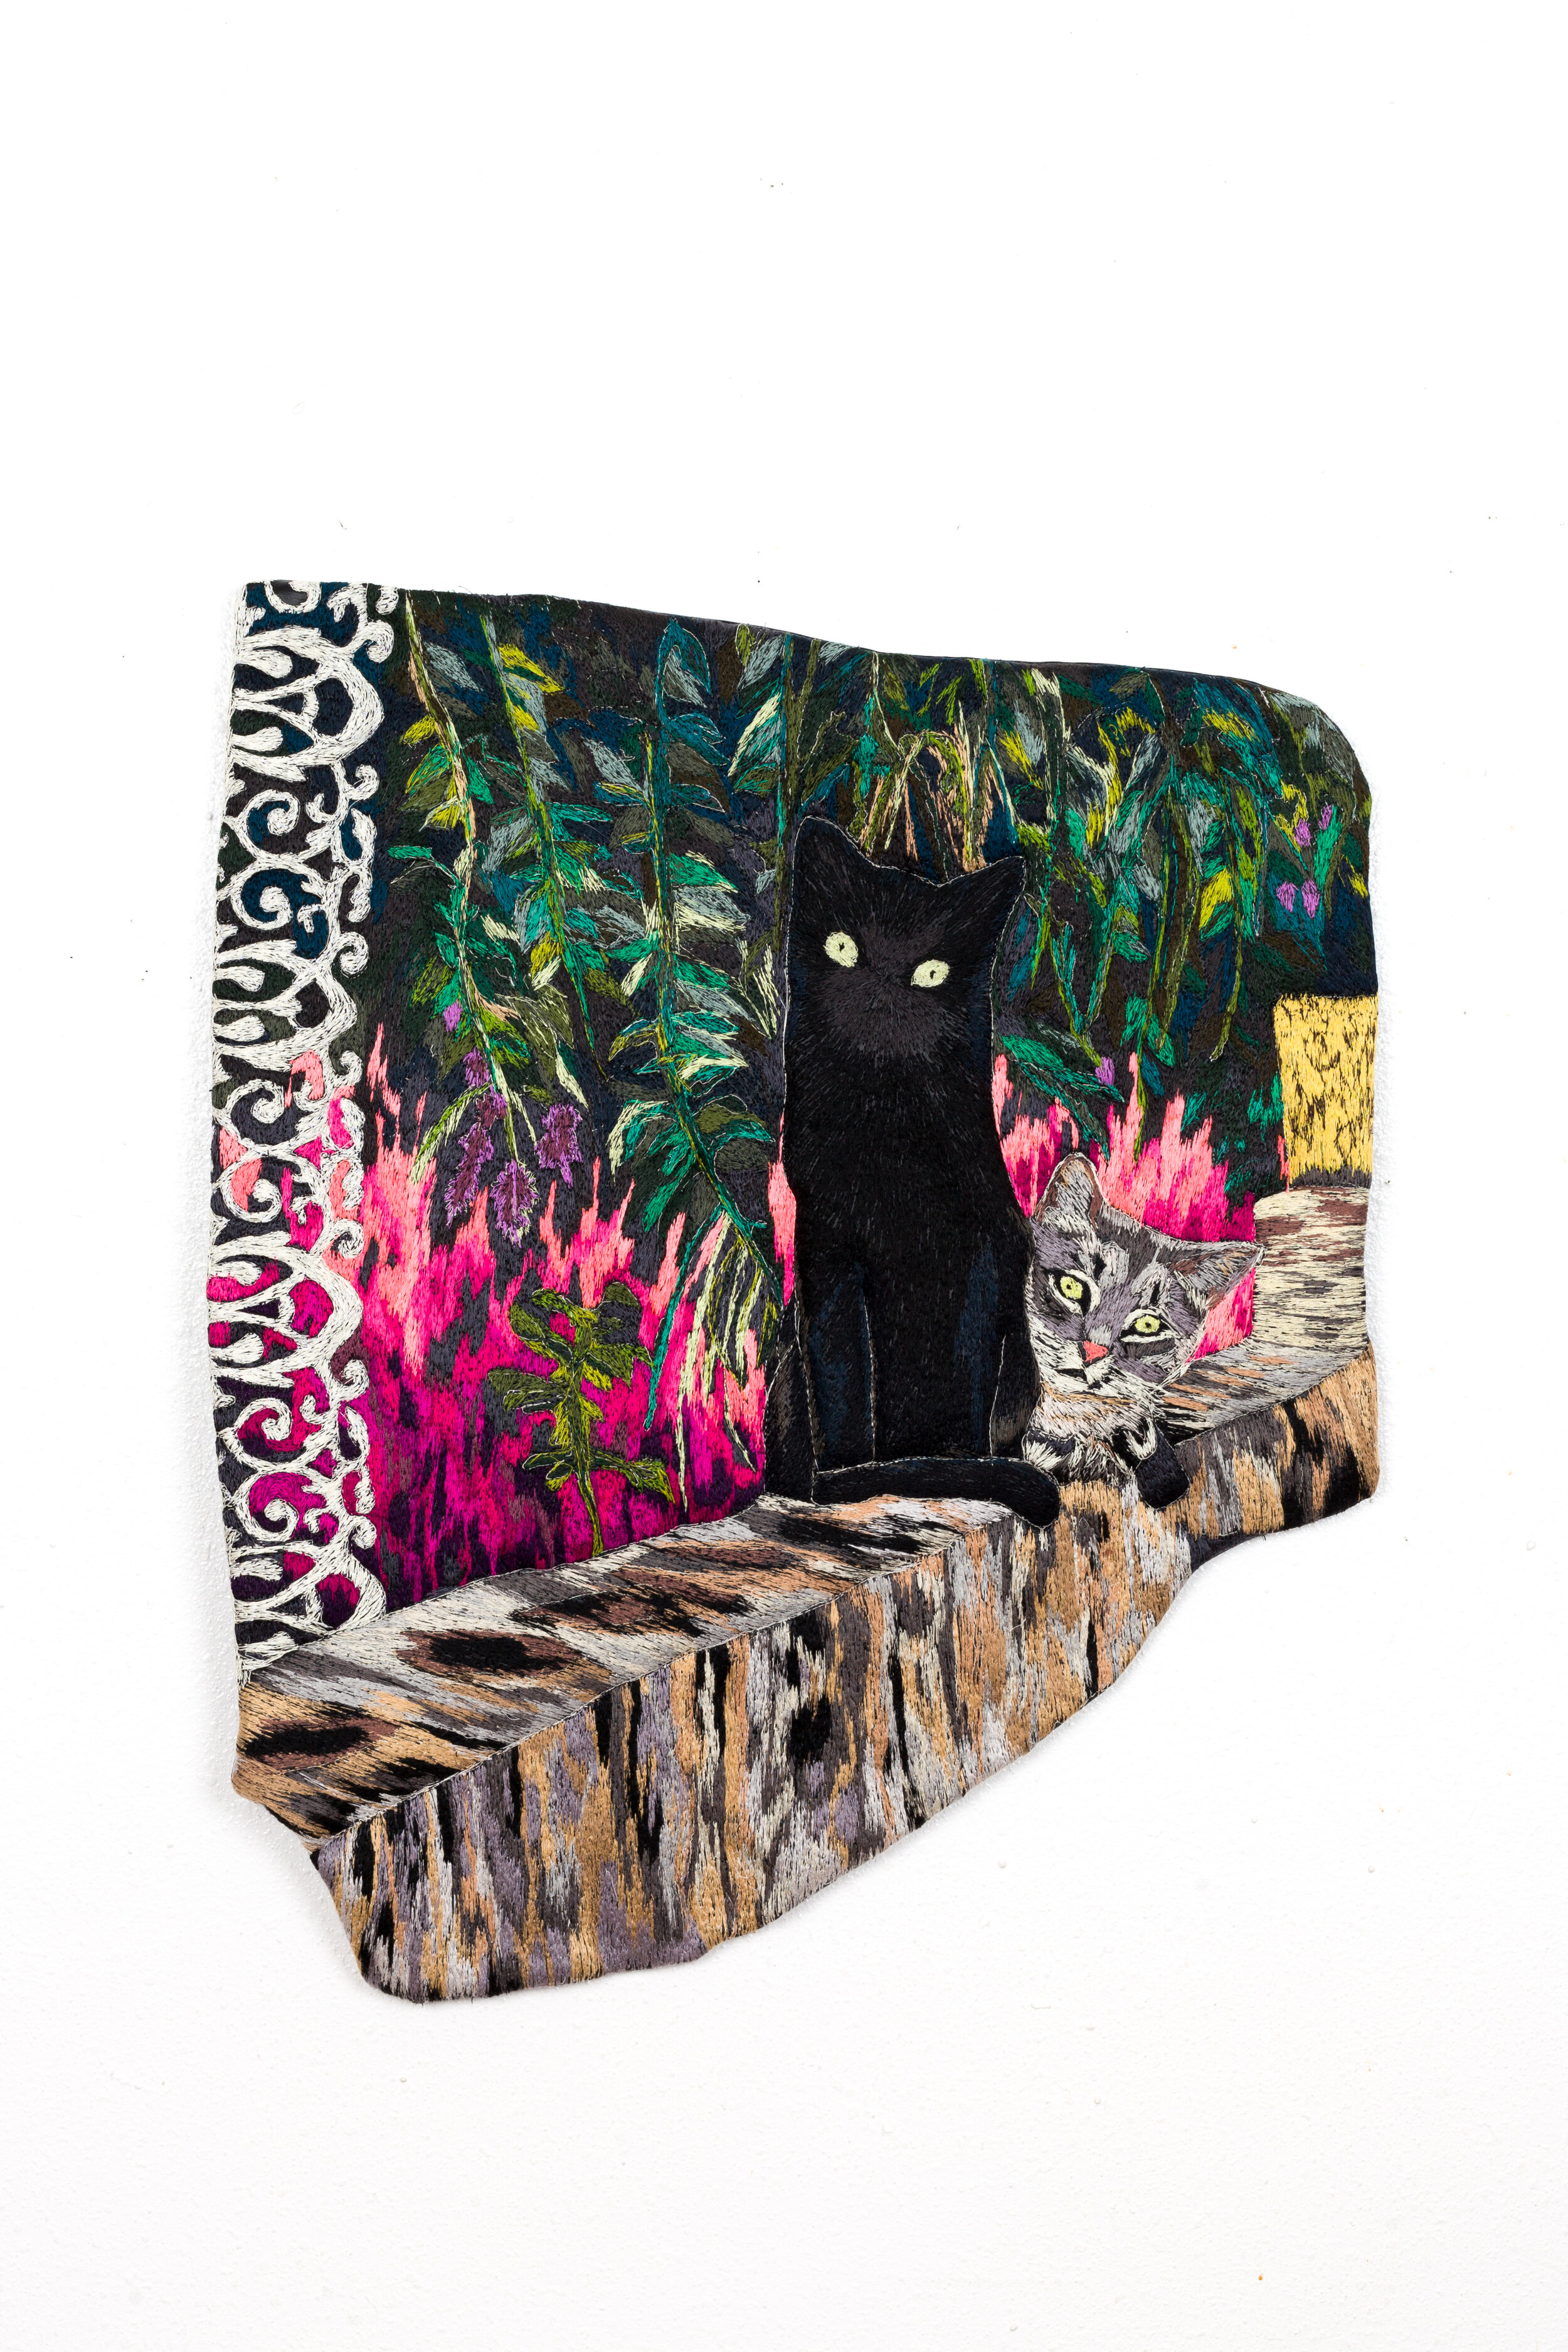  Vecinos (BH street cats), 2021   Faux leather, polyester thread, polyurethane foam, hardware  22x27 inches 